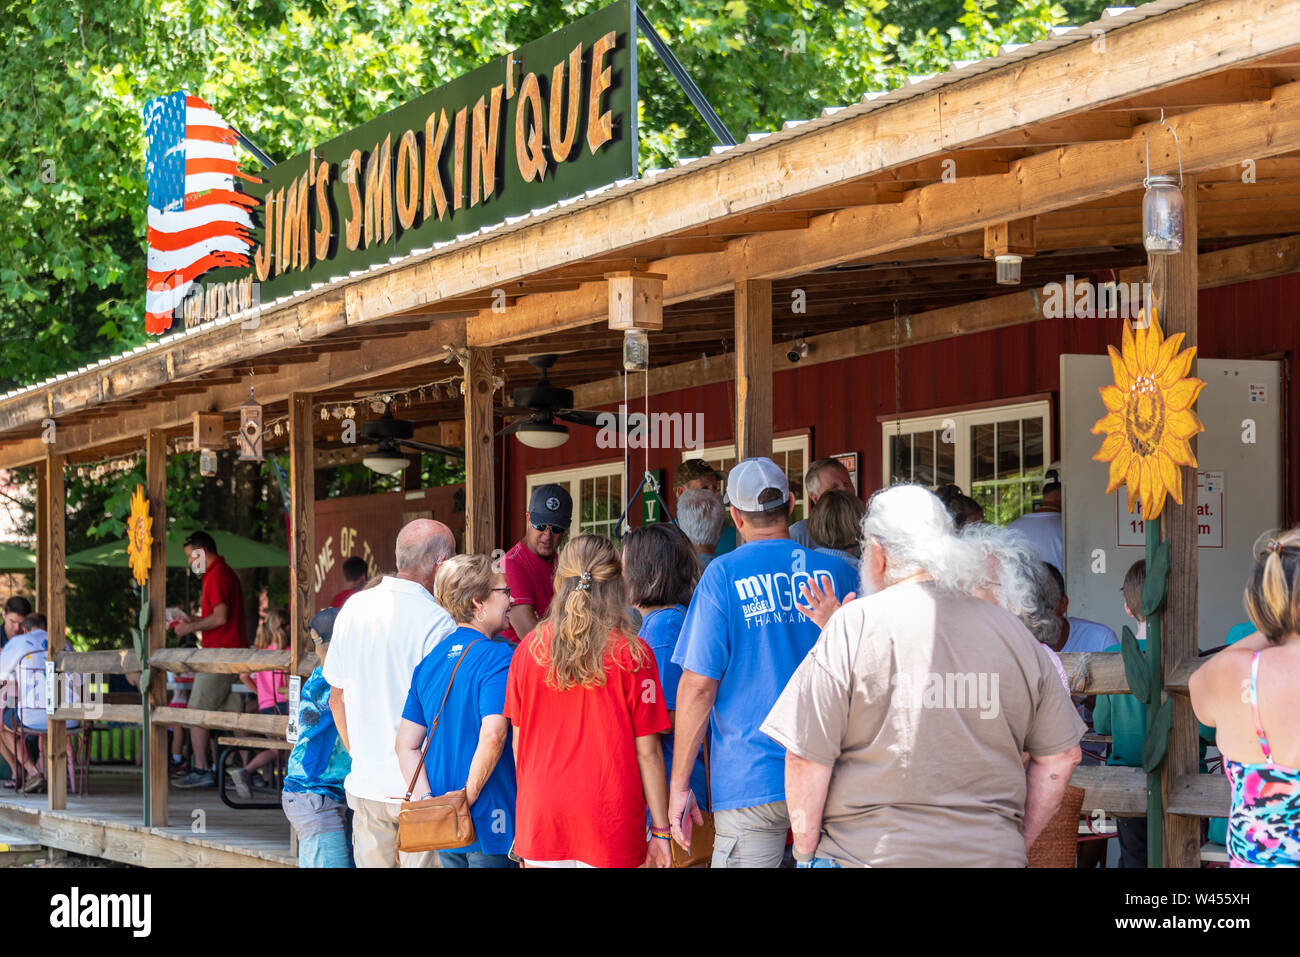 Always a line and always worth waiting for the 'Low & Slow' smoked BBQ at Jim's Smokin' Que in the Blue Ridge Mountains at Blairsville, Georgia. (USA) Stock Photo